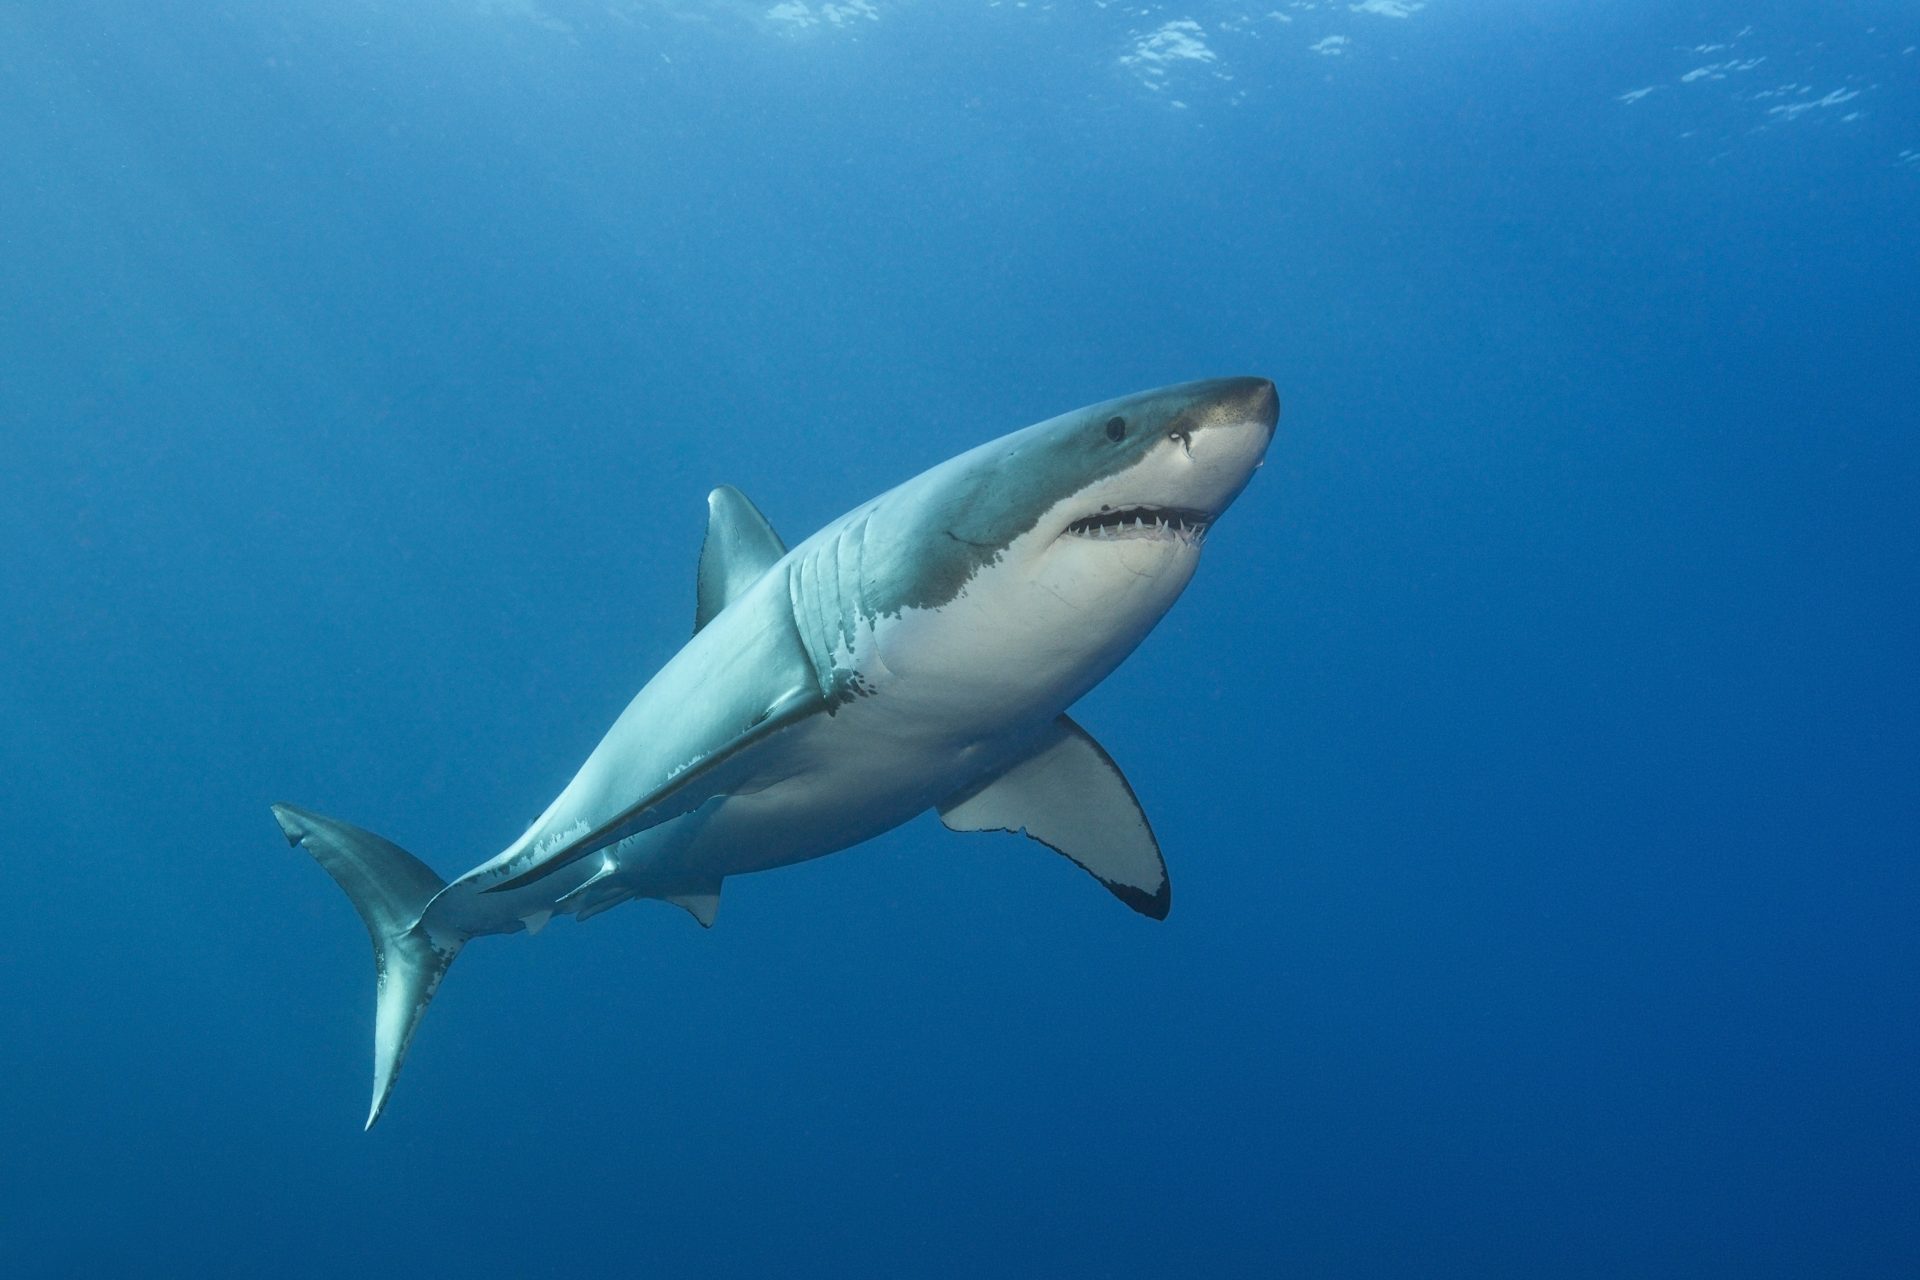 A new shark barrier aims to save lives among stunning deaths